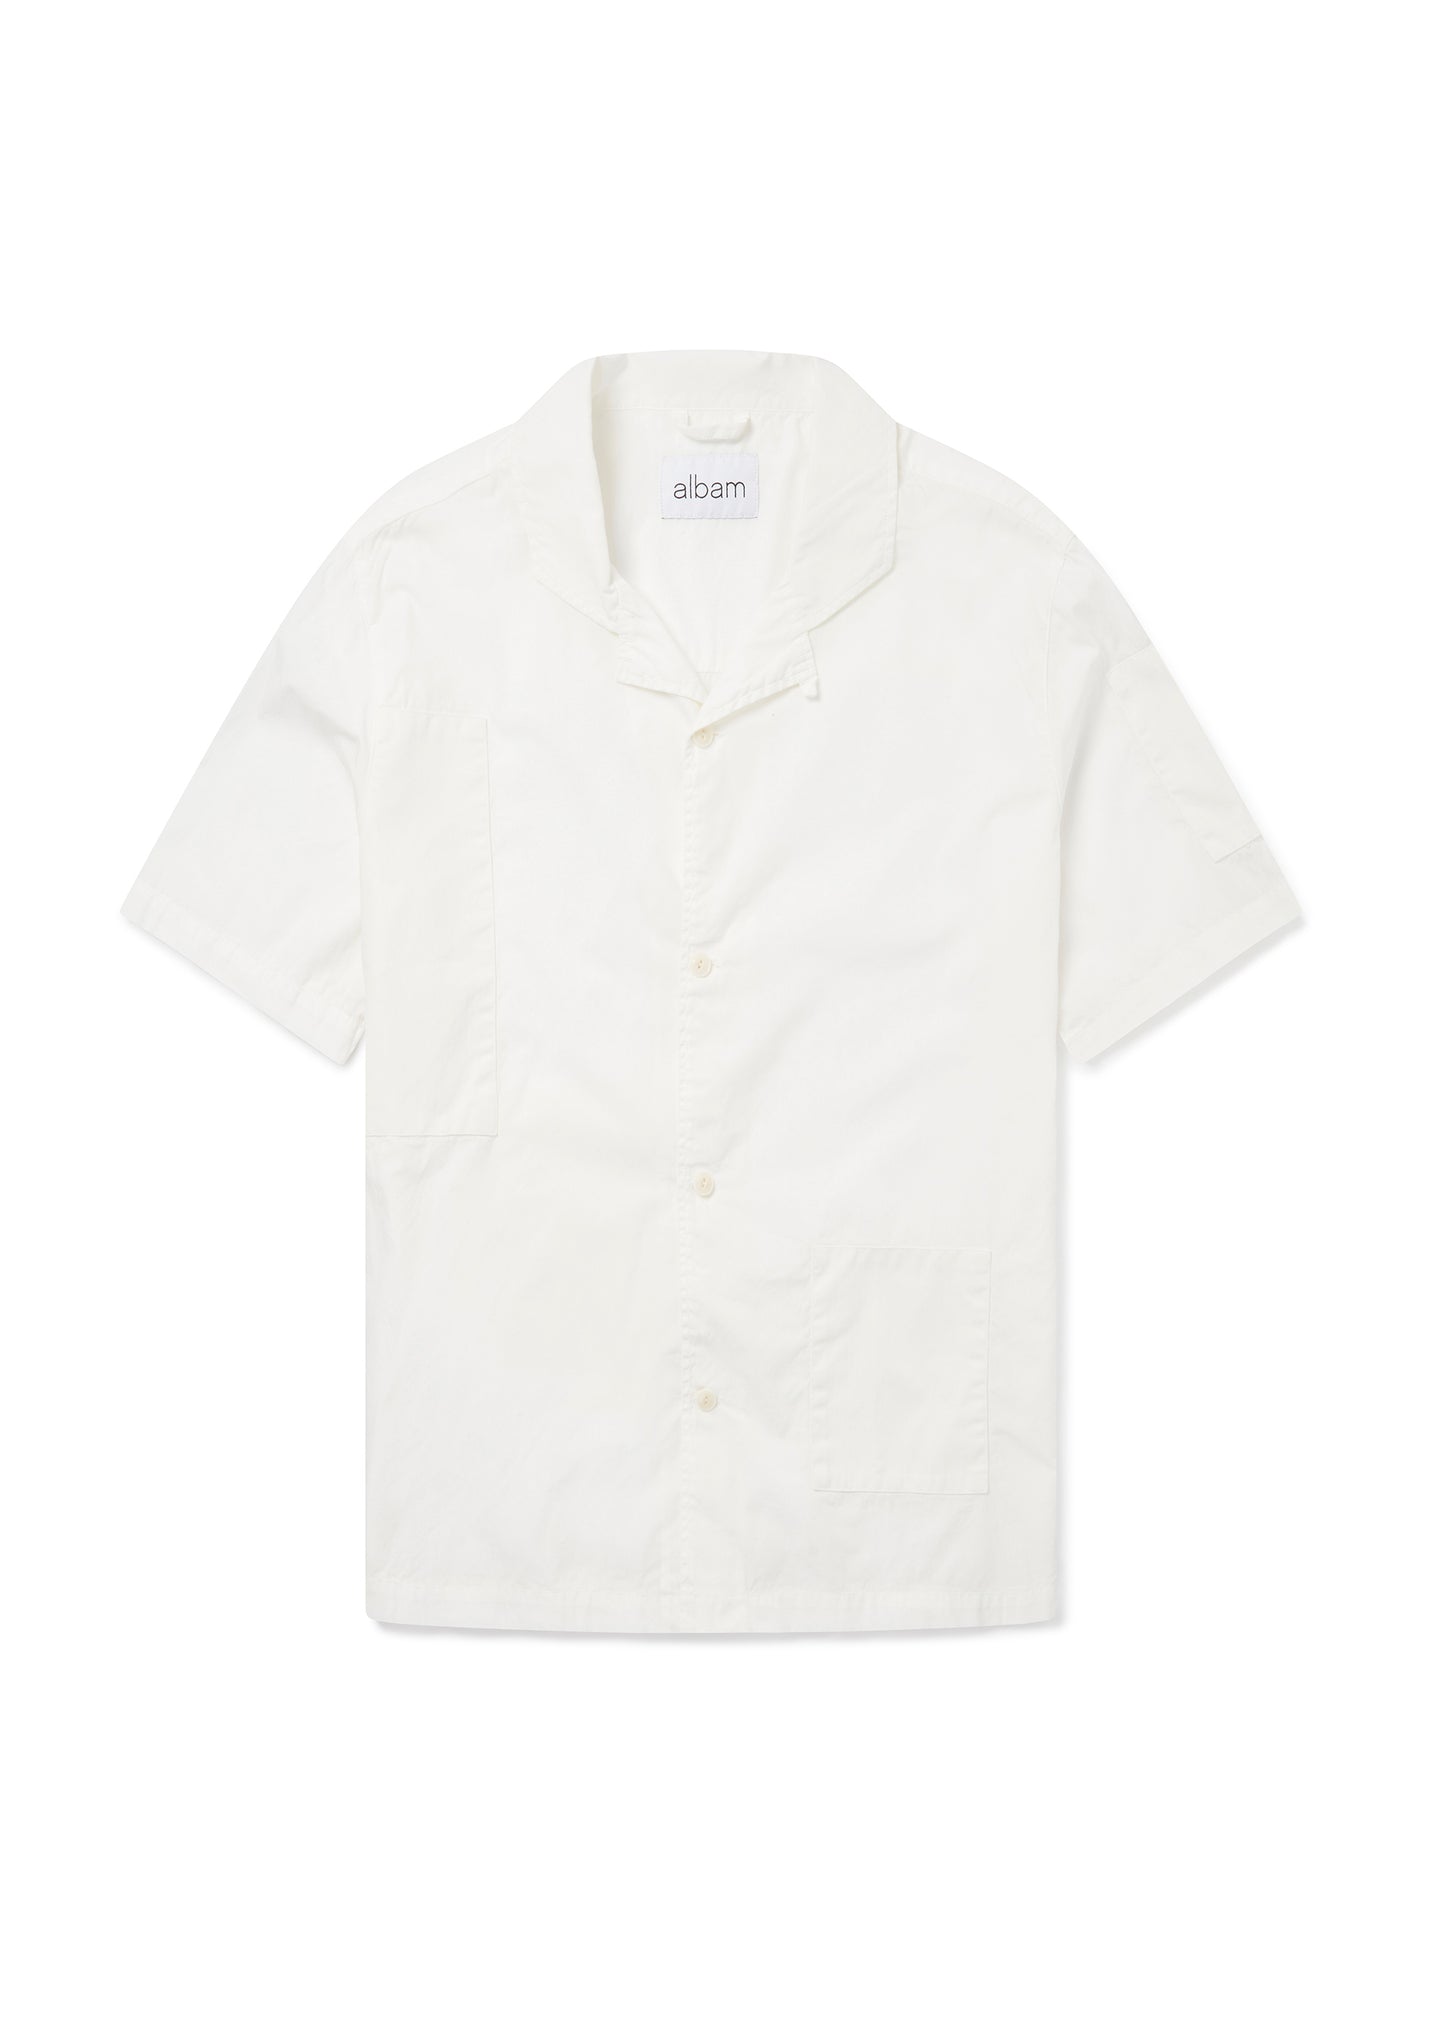 Patchwork SS Shirt in Off-White